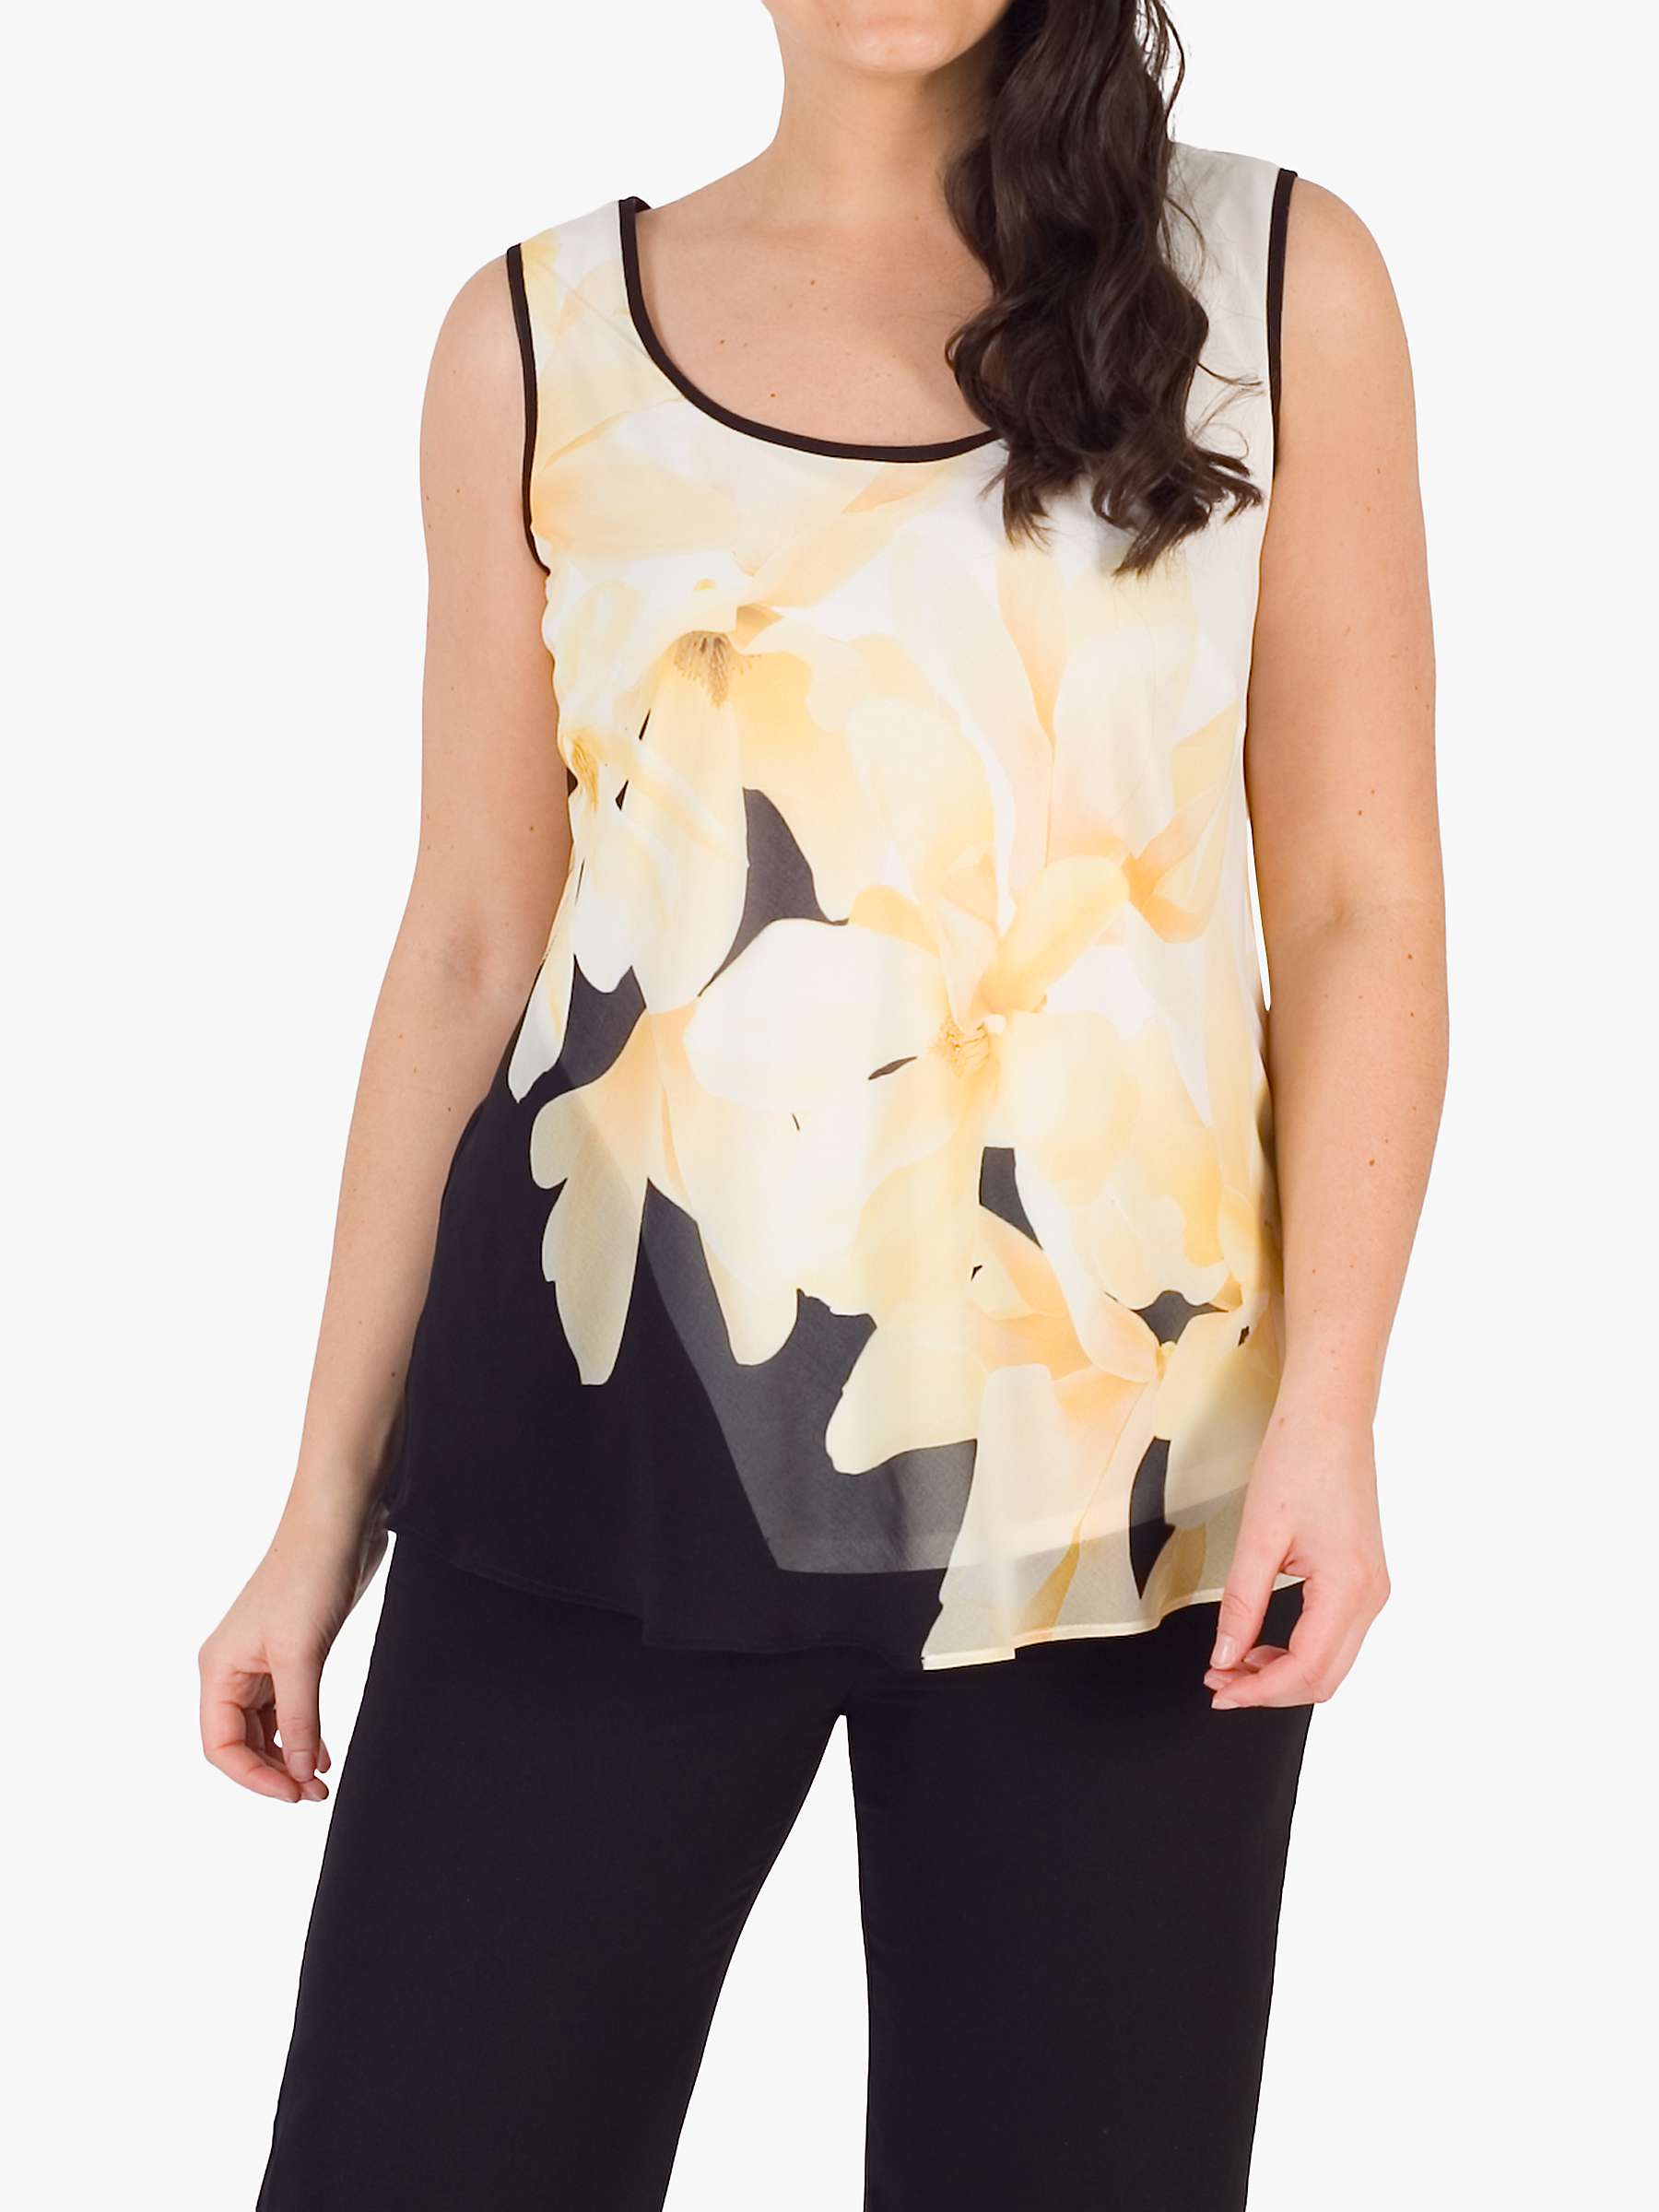 Buy chesca Chiffon Floral Print Cami Top, Black/Yellow/Ivory Online at johnlewis.com